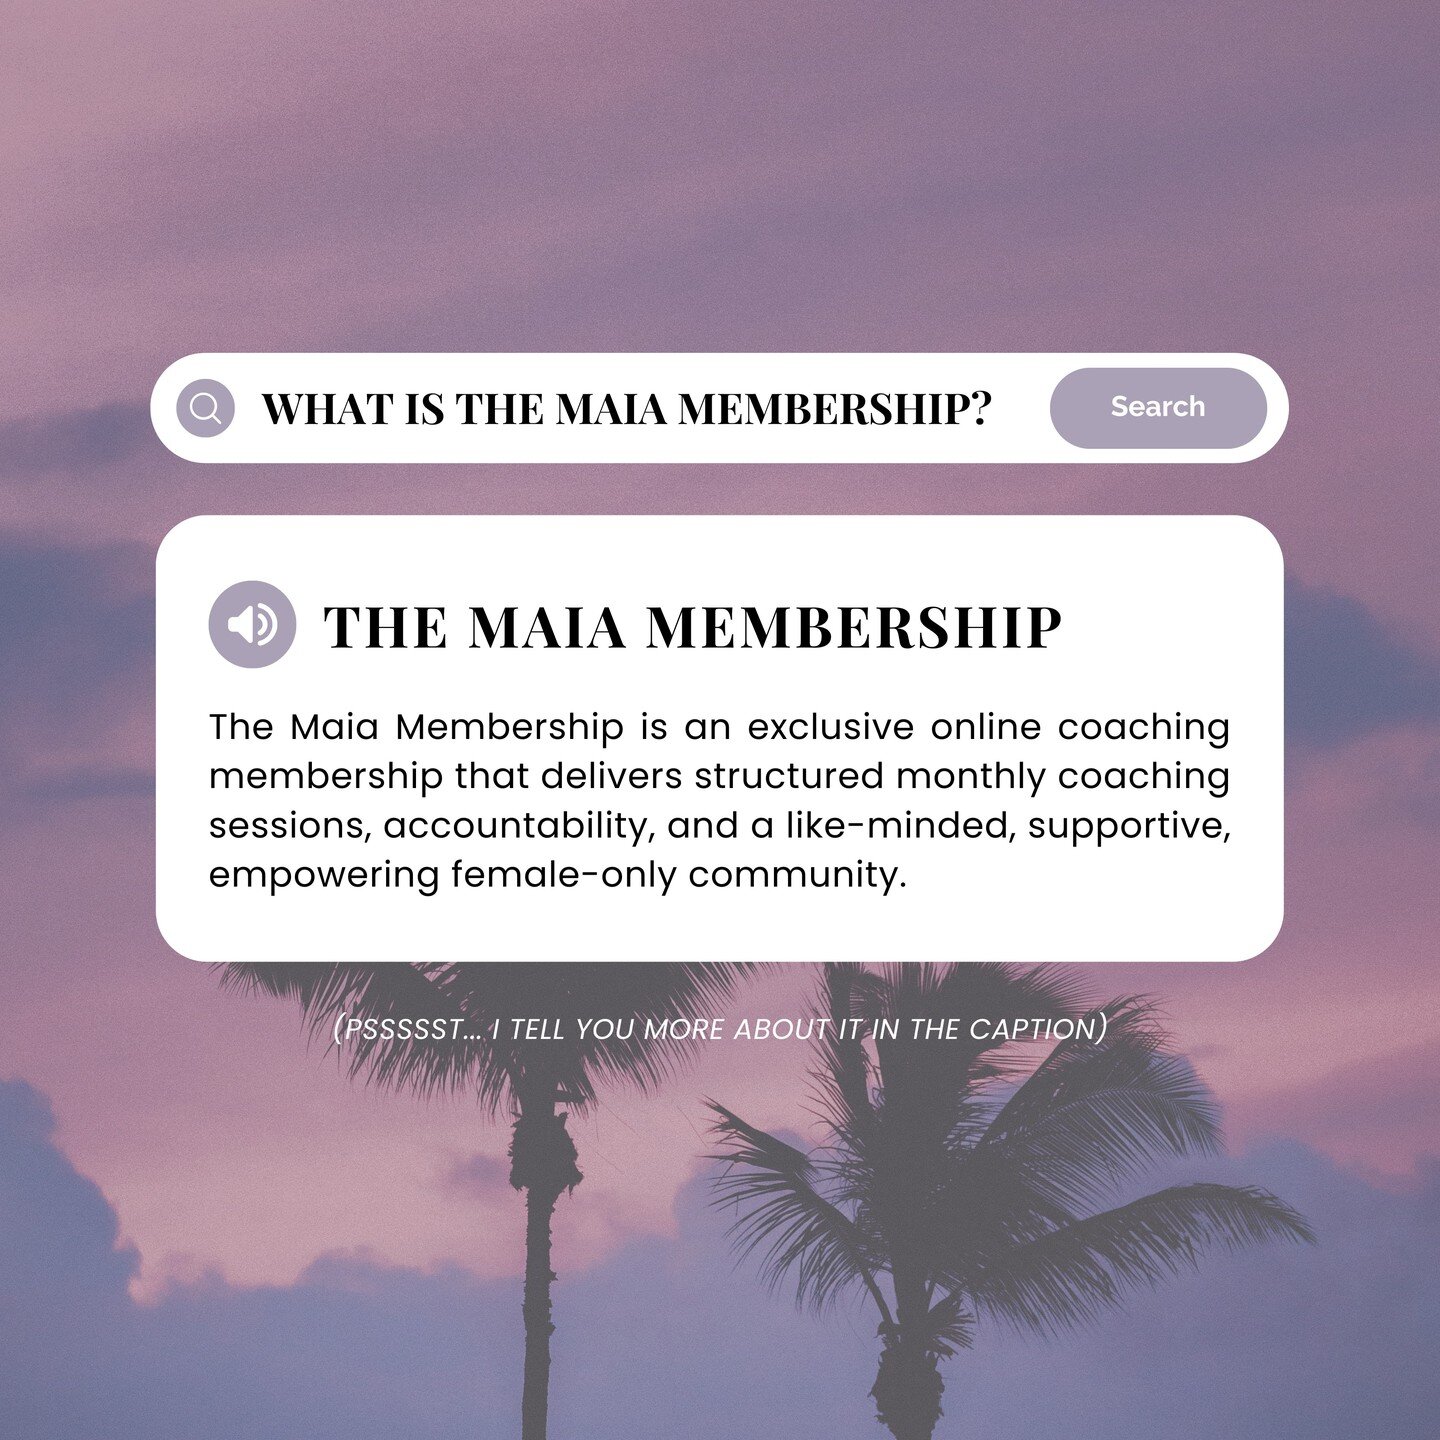 Hey there! Have you heard about The Maia Membership?

It's an awesome online coaching community just for women like you!

If you're all about self-development, growth, and connecting with other amazing women, then you're in the right place.

So, what